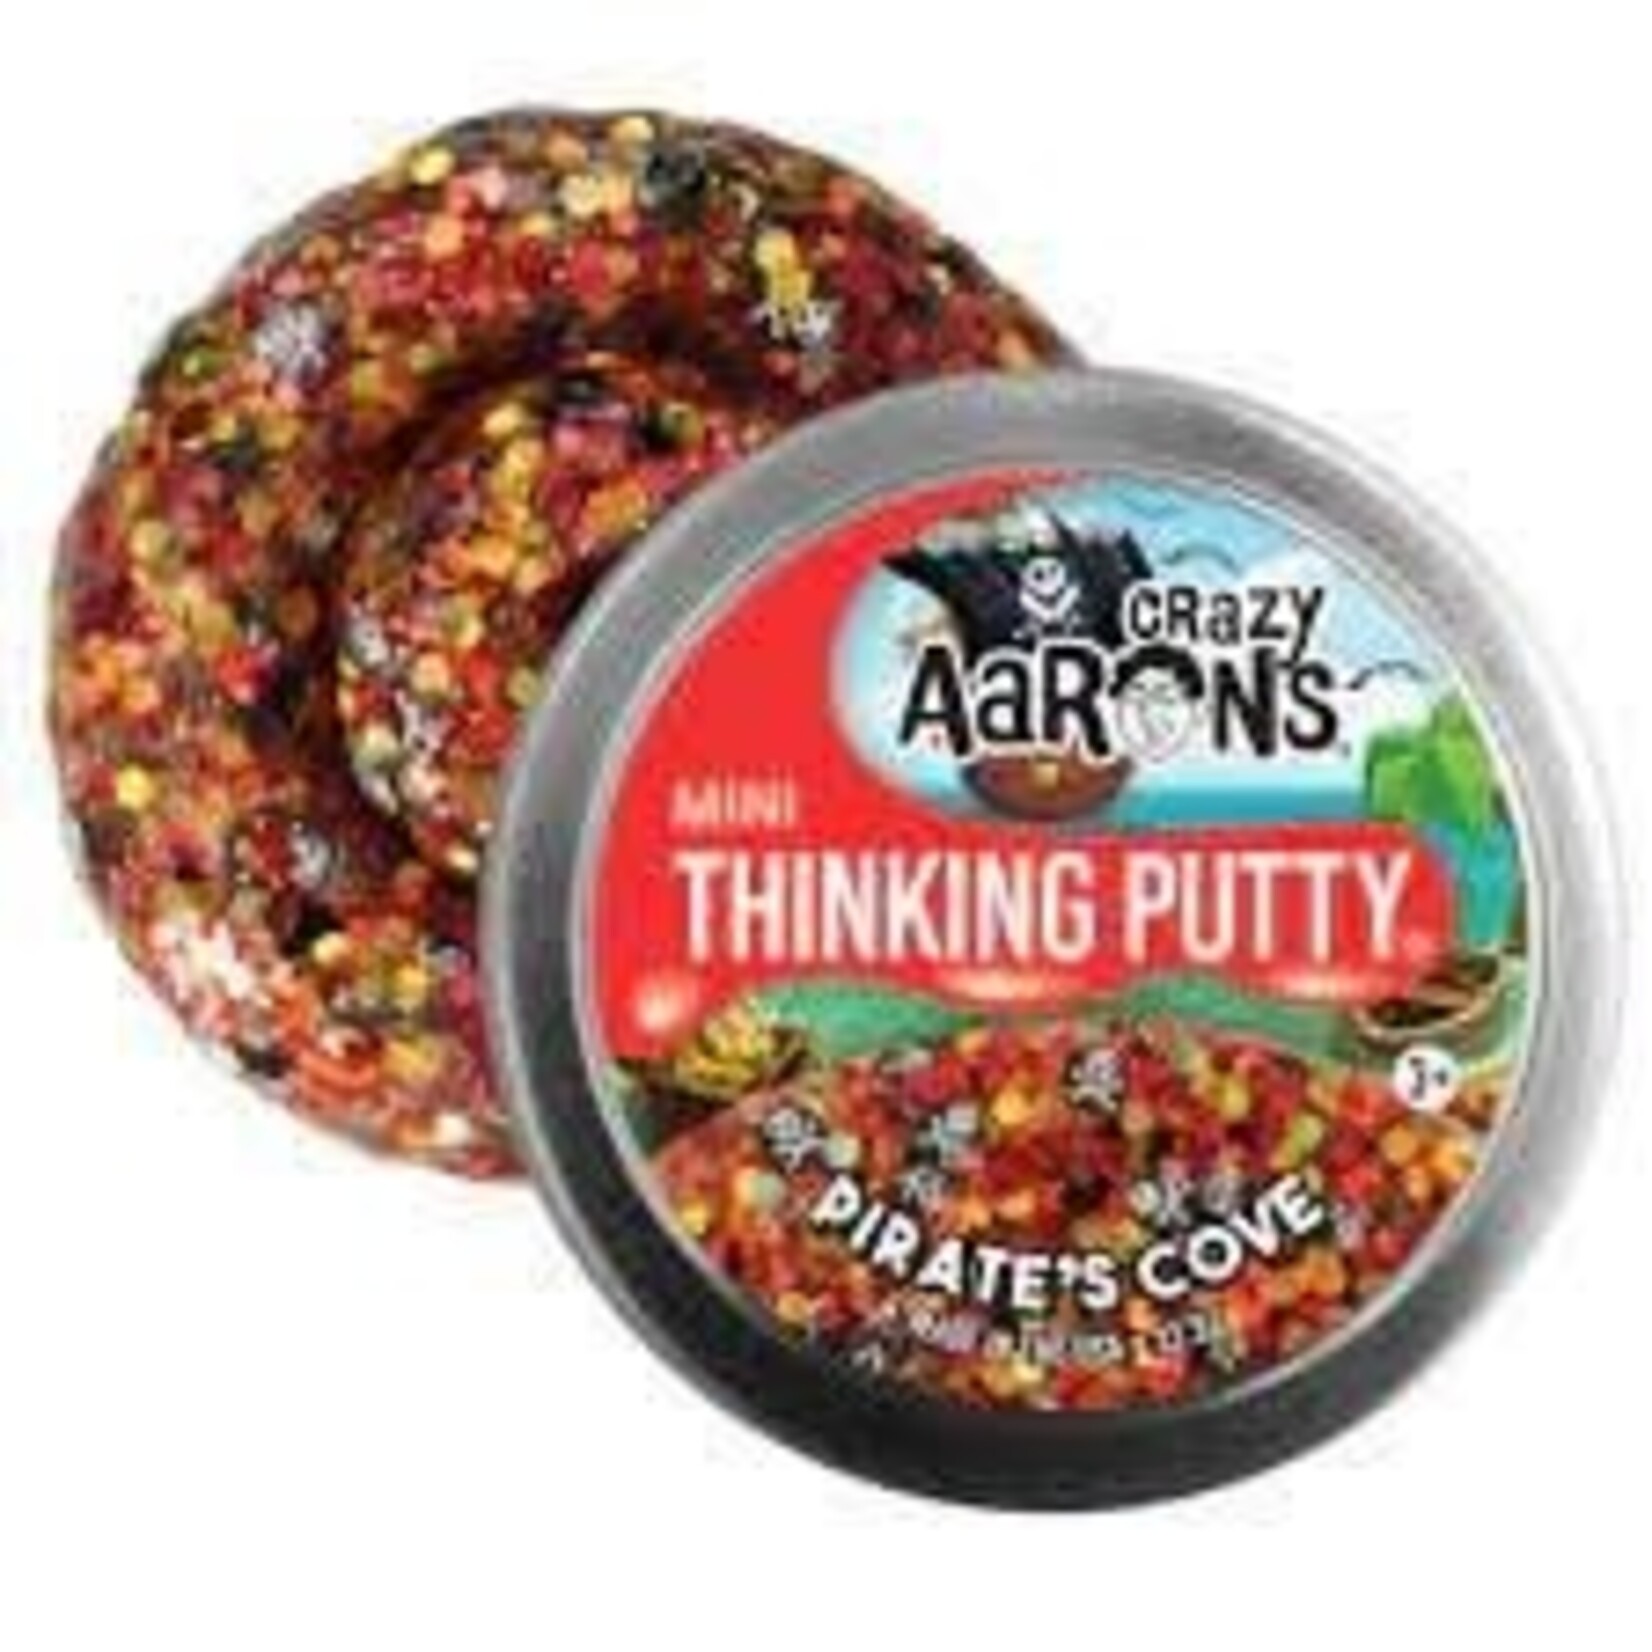 Crazy Aaron's Thinking Putty Trendsetter Mini